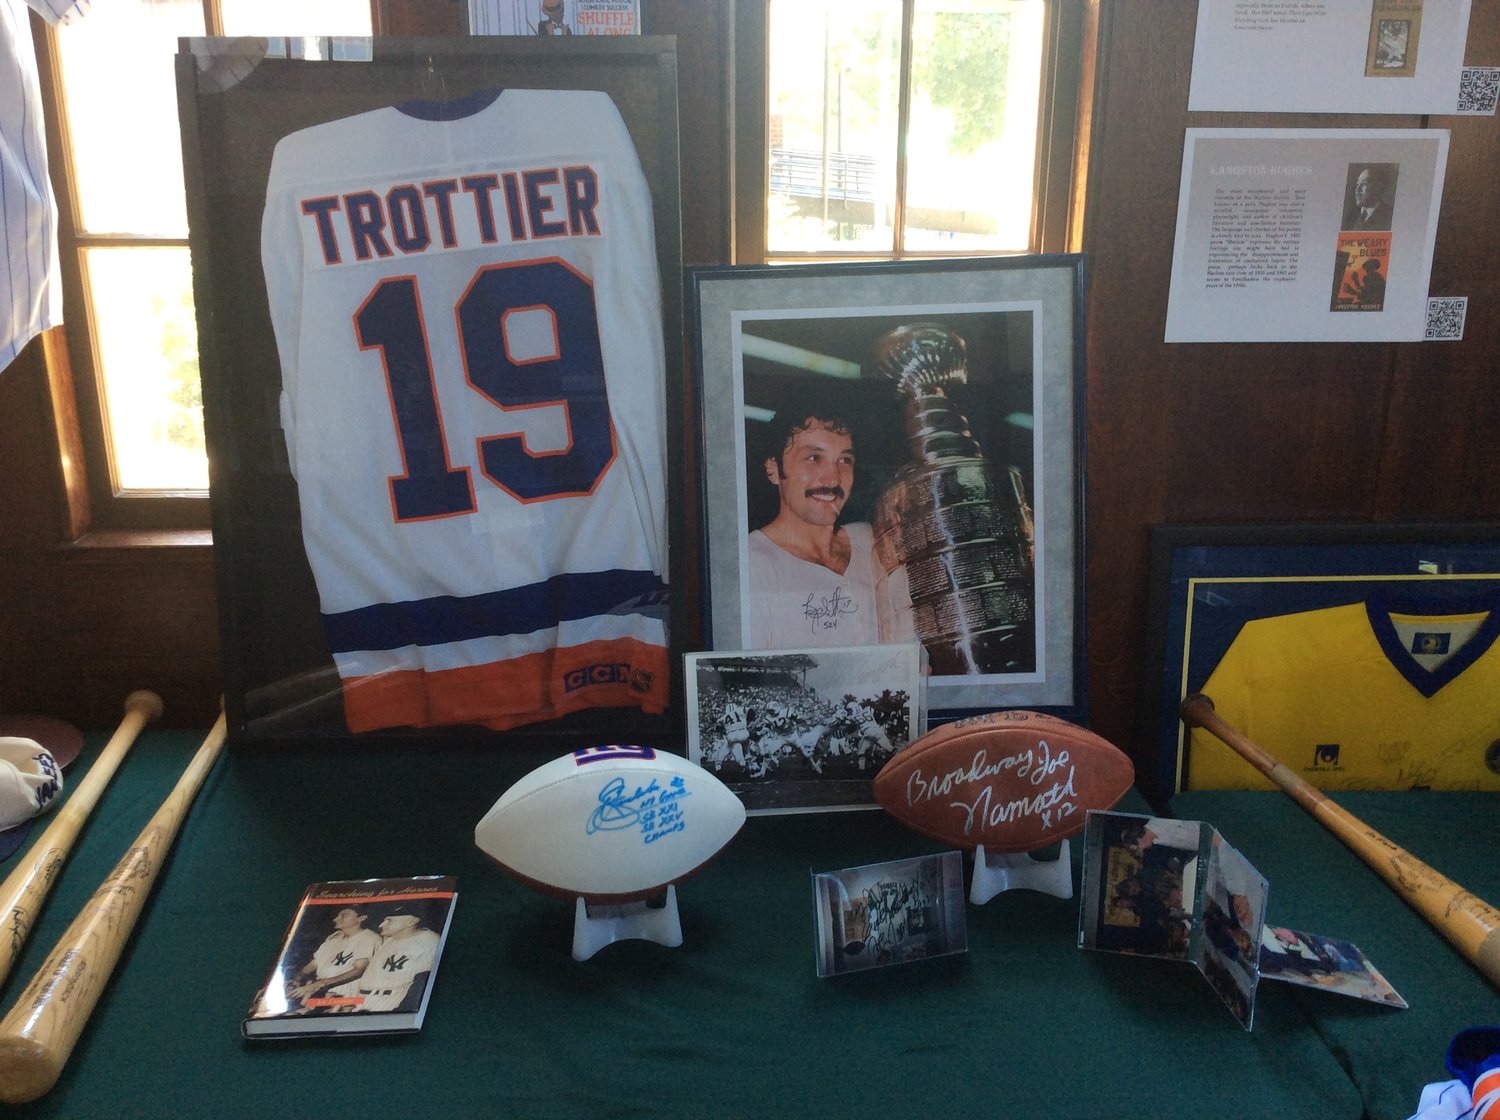 The museum featured a sports memorabilia lecture, showcasing autographs from famed athletes.